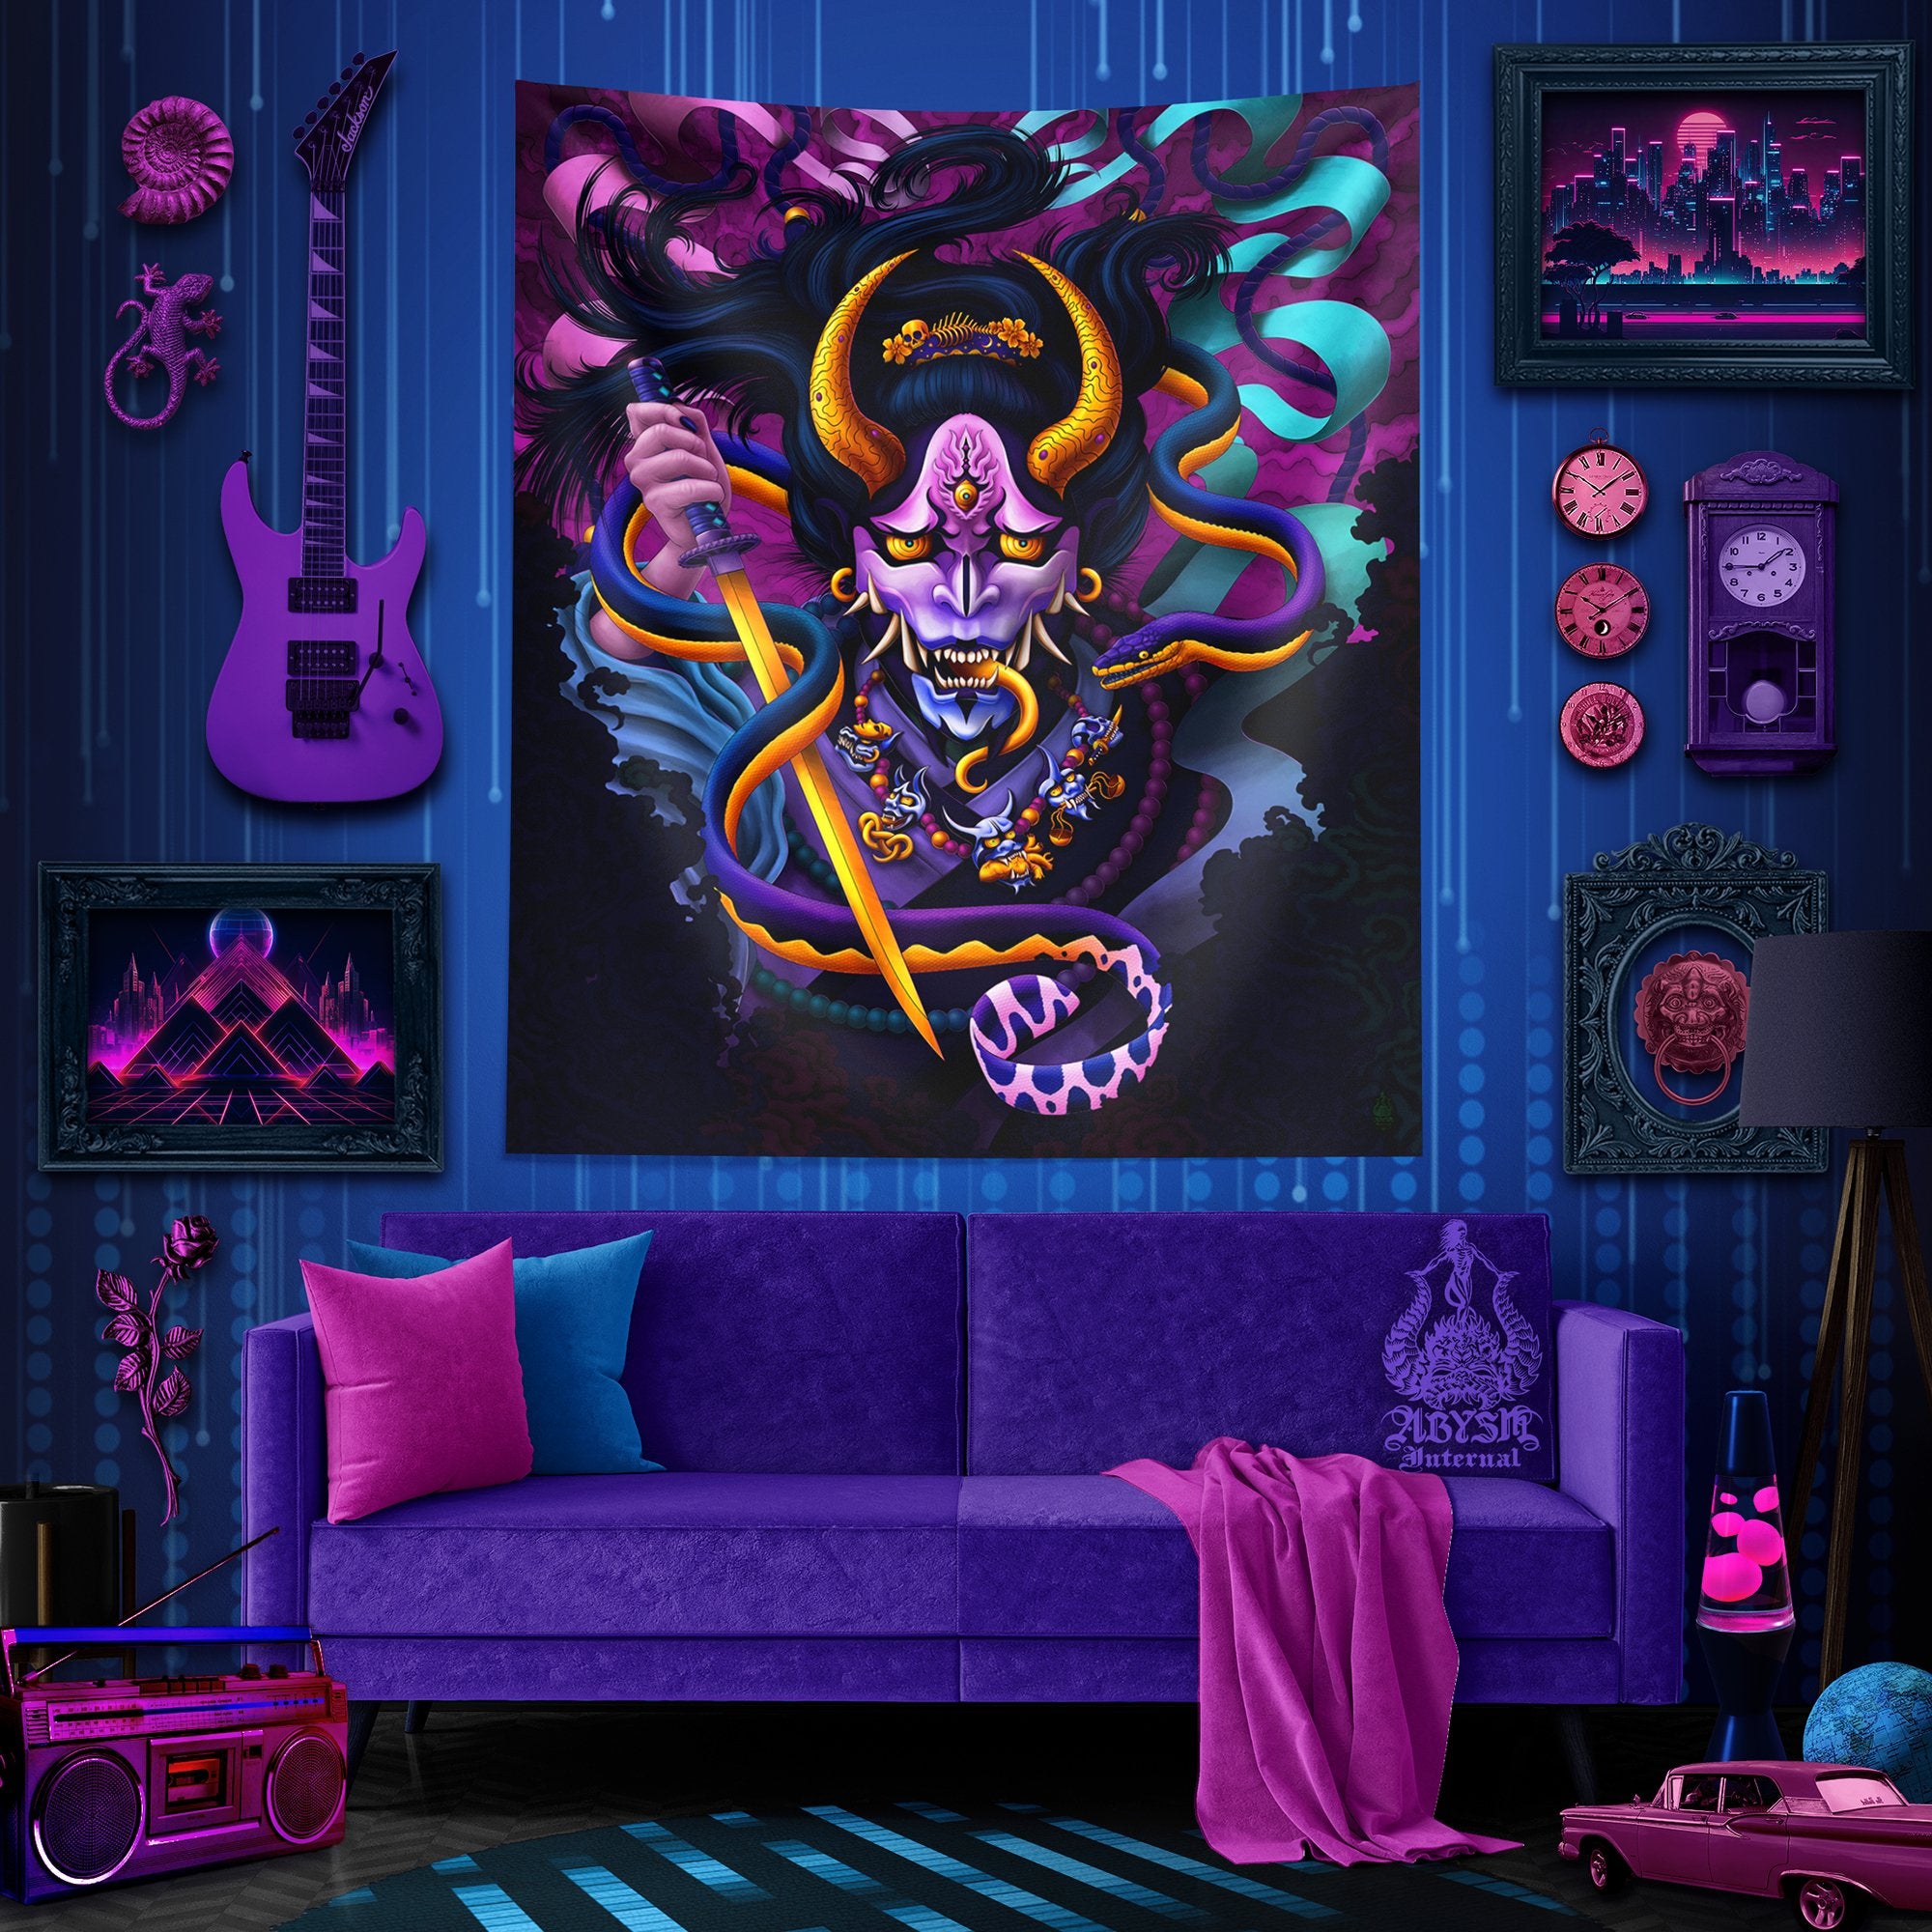 Pastel Demon Tapestry, Hannya and Snake Wall Hanging, Trippy, Japanese Manga, Anime and Gamer Room Decor, Psychedelic Vertical Art Print - Black - Abysm Internal